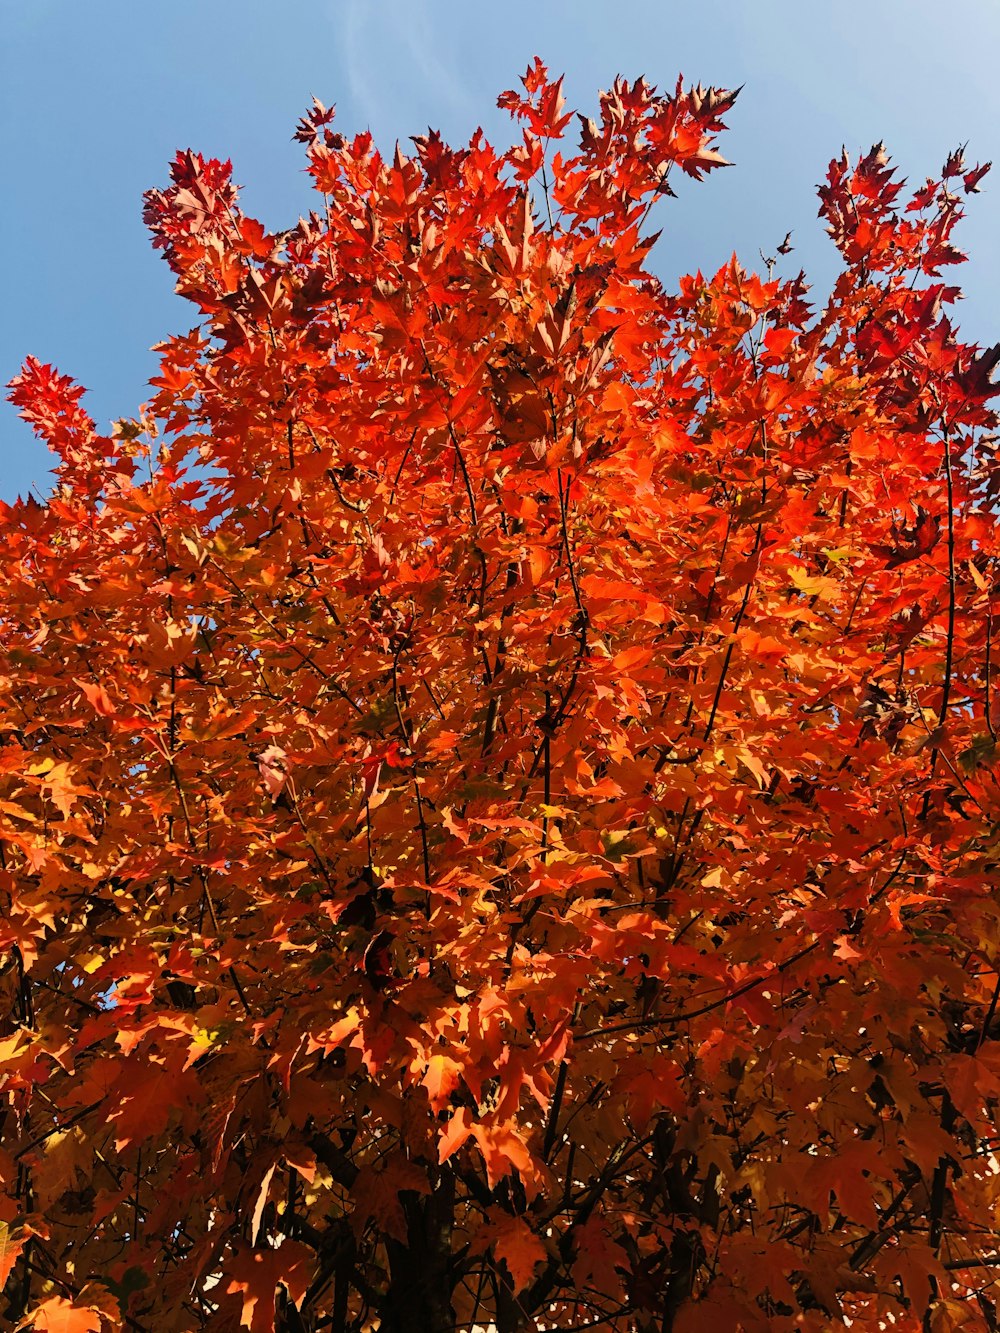 red and brown leaves tree under blue sky during daytime